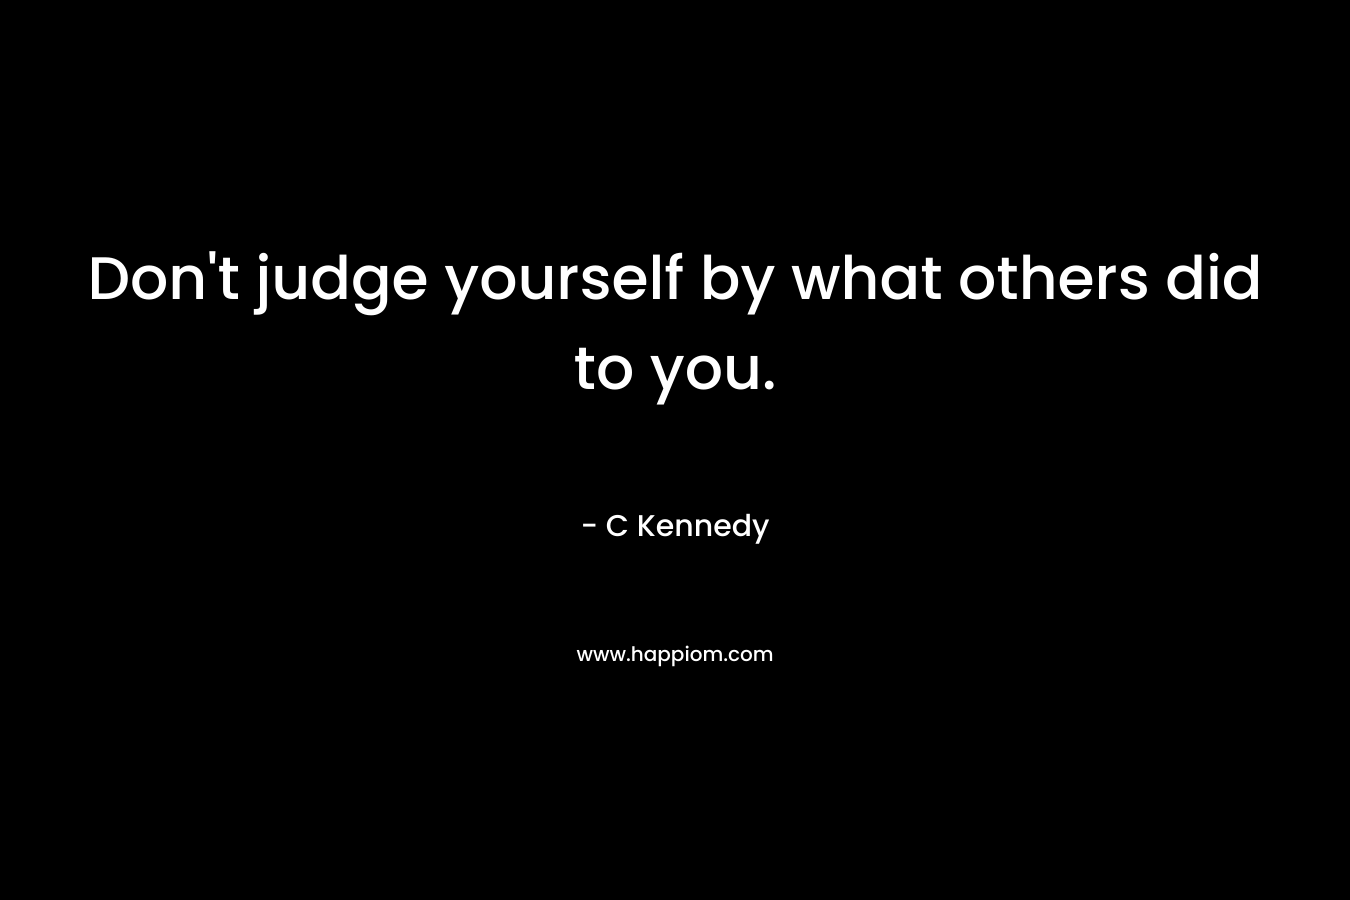 Don't judge yourself by what others did to you.